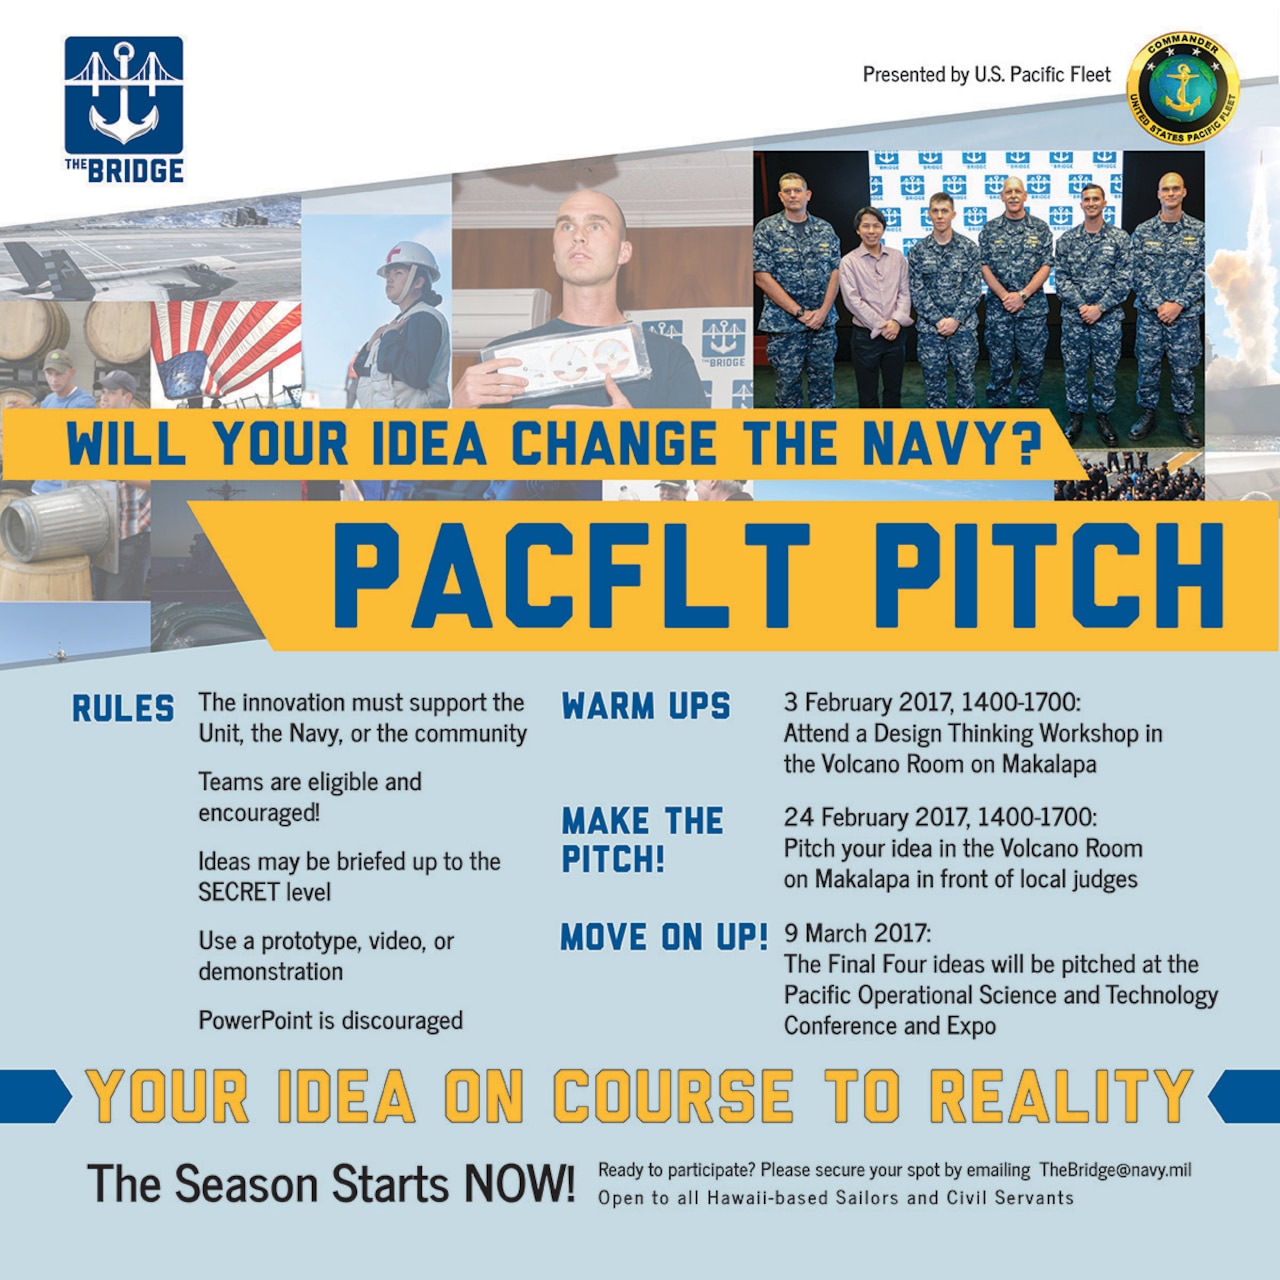 he Bridge is a Commander, US Pacific Fleet initiative that amplifies an organic Navy network of 140,000 Sailors in the Pacific to enable collaboration and idea generation by advancing education, enabling empowerment, stimulating connections, and spurring transition. 